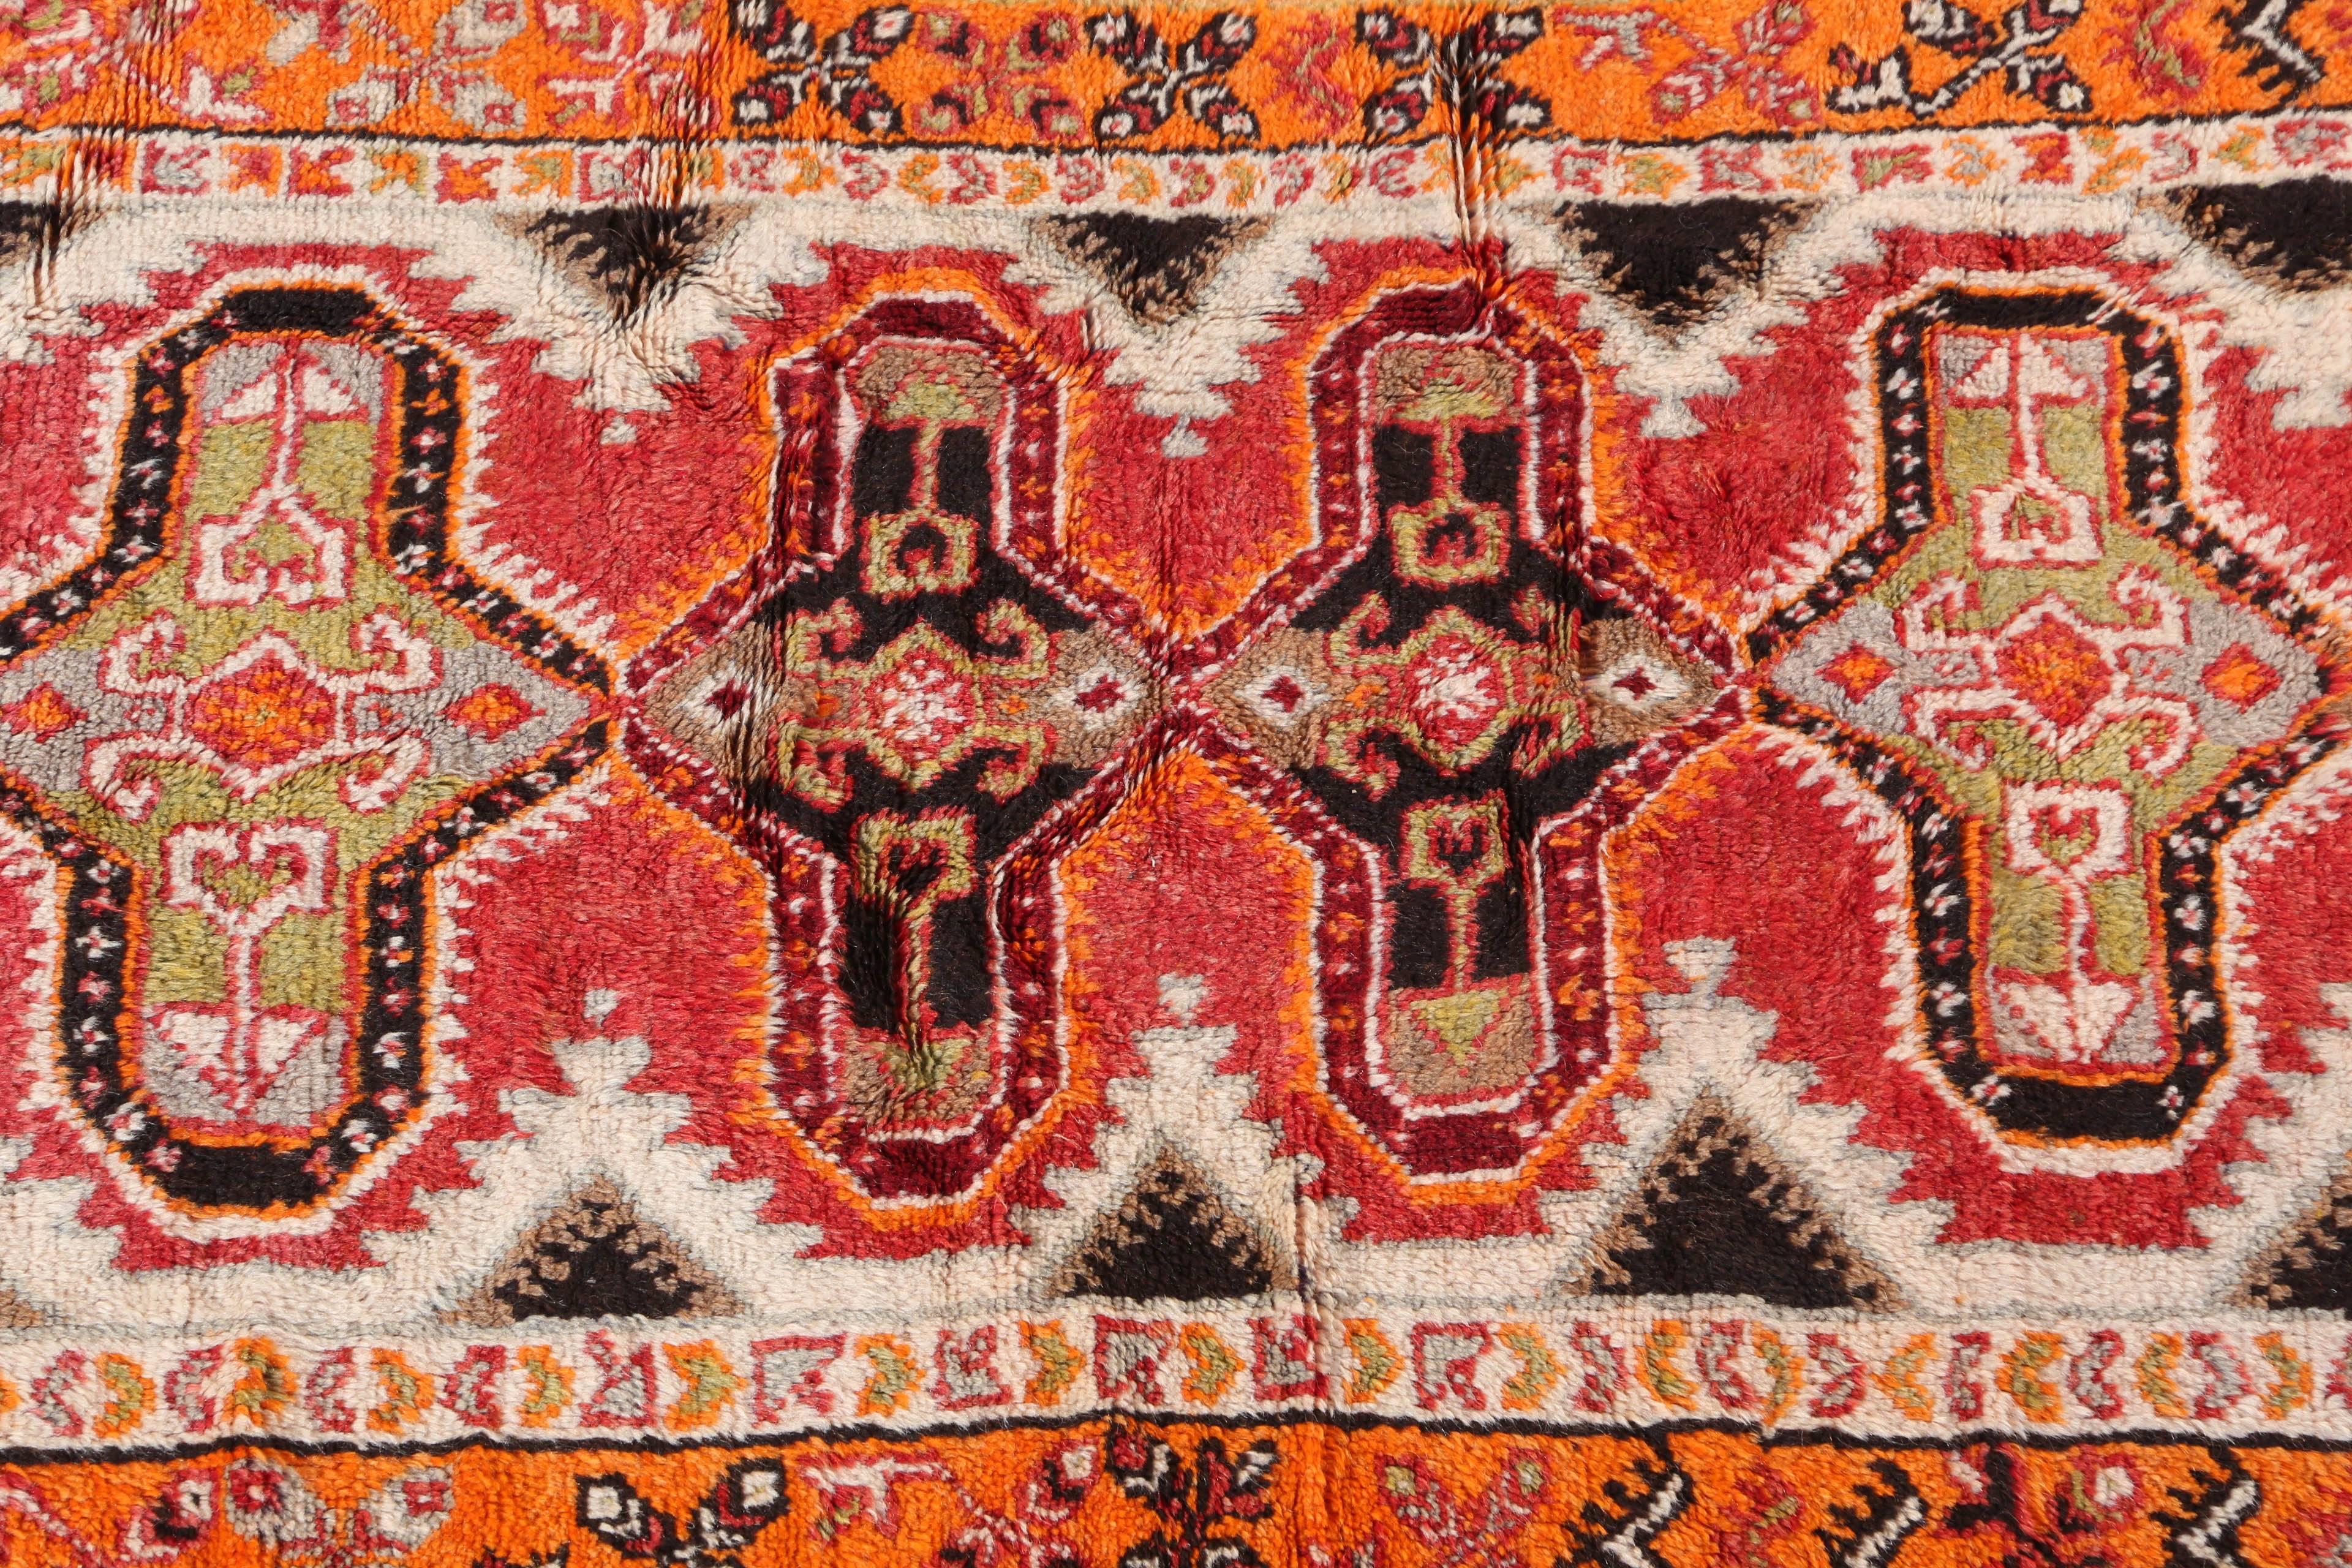 Great Moroccan vintage rug.
Handwoven by the Berber women of Morocco.
Orange colors with pink, ivory red and black geometrical tribal designs.
Great Folk Art African carpet collector textile.